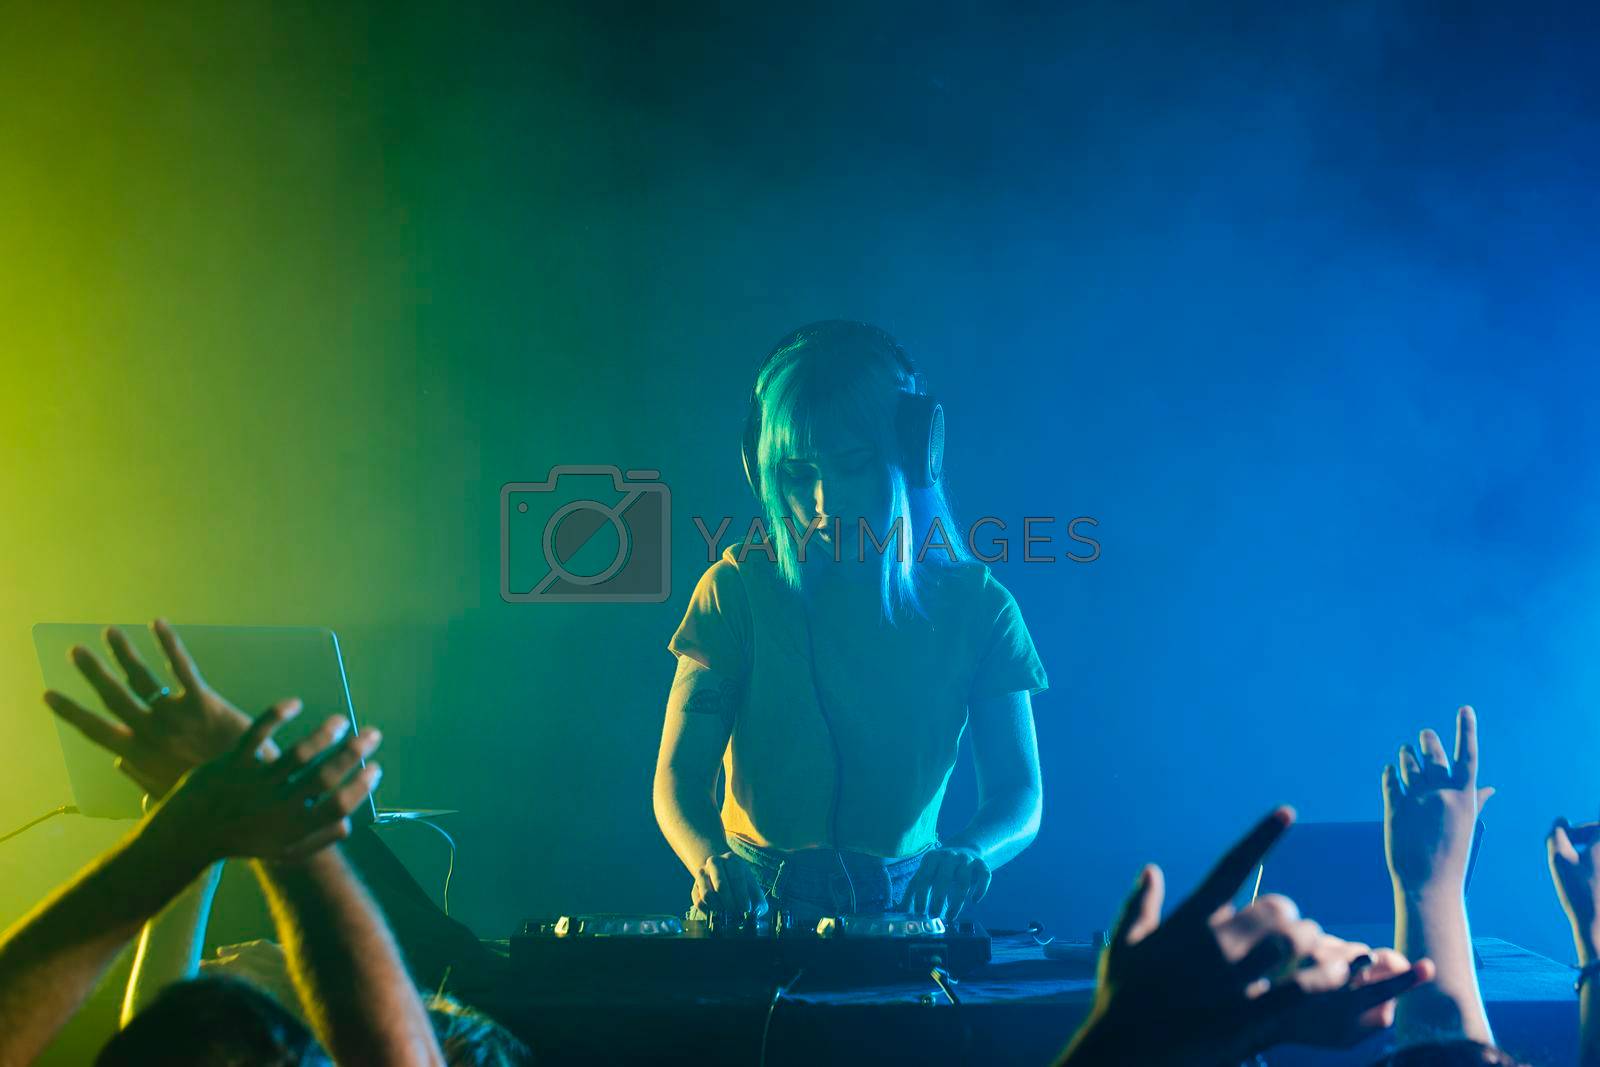 Royalty free image of clubbing with female dj mixing crowd by Zahard